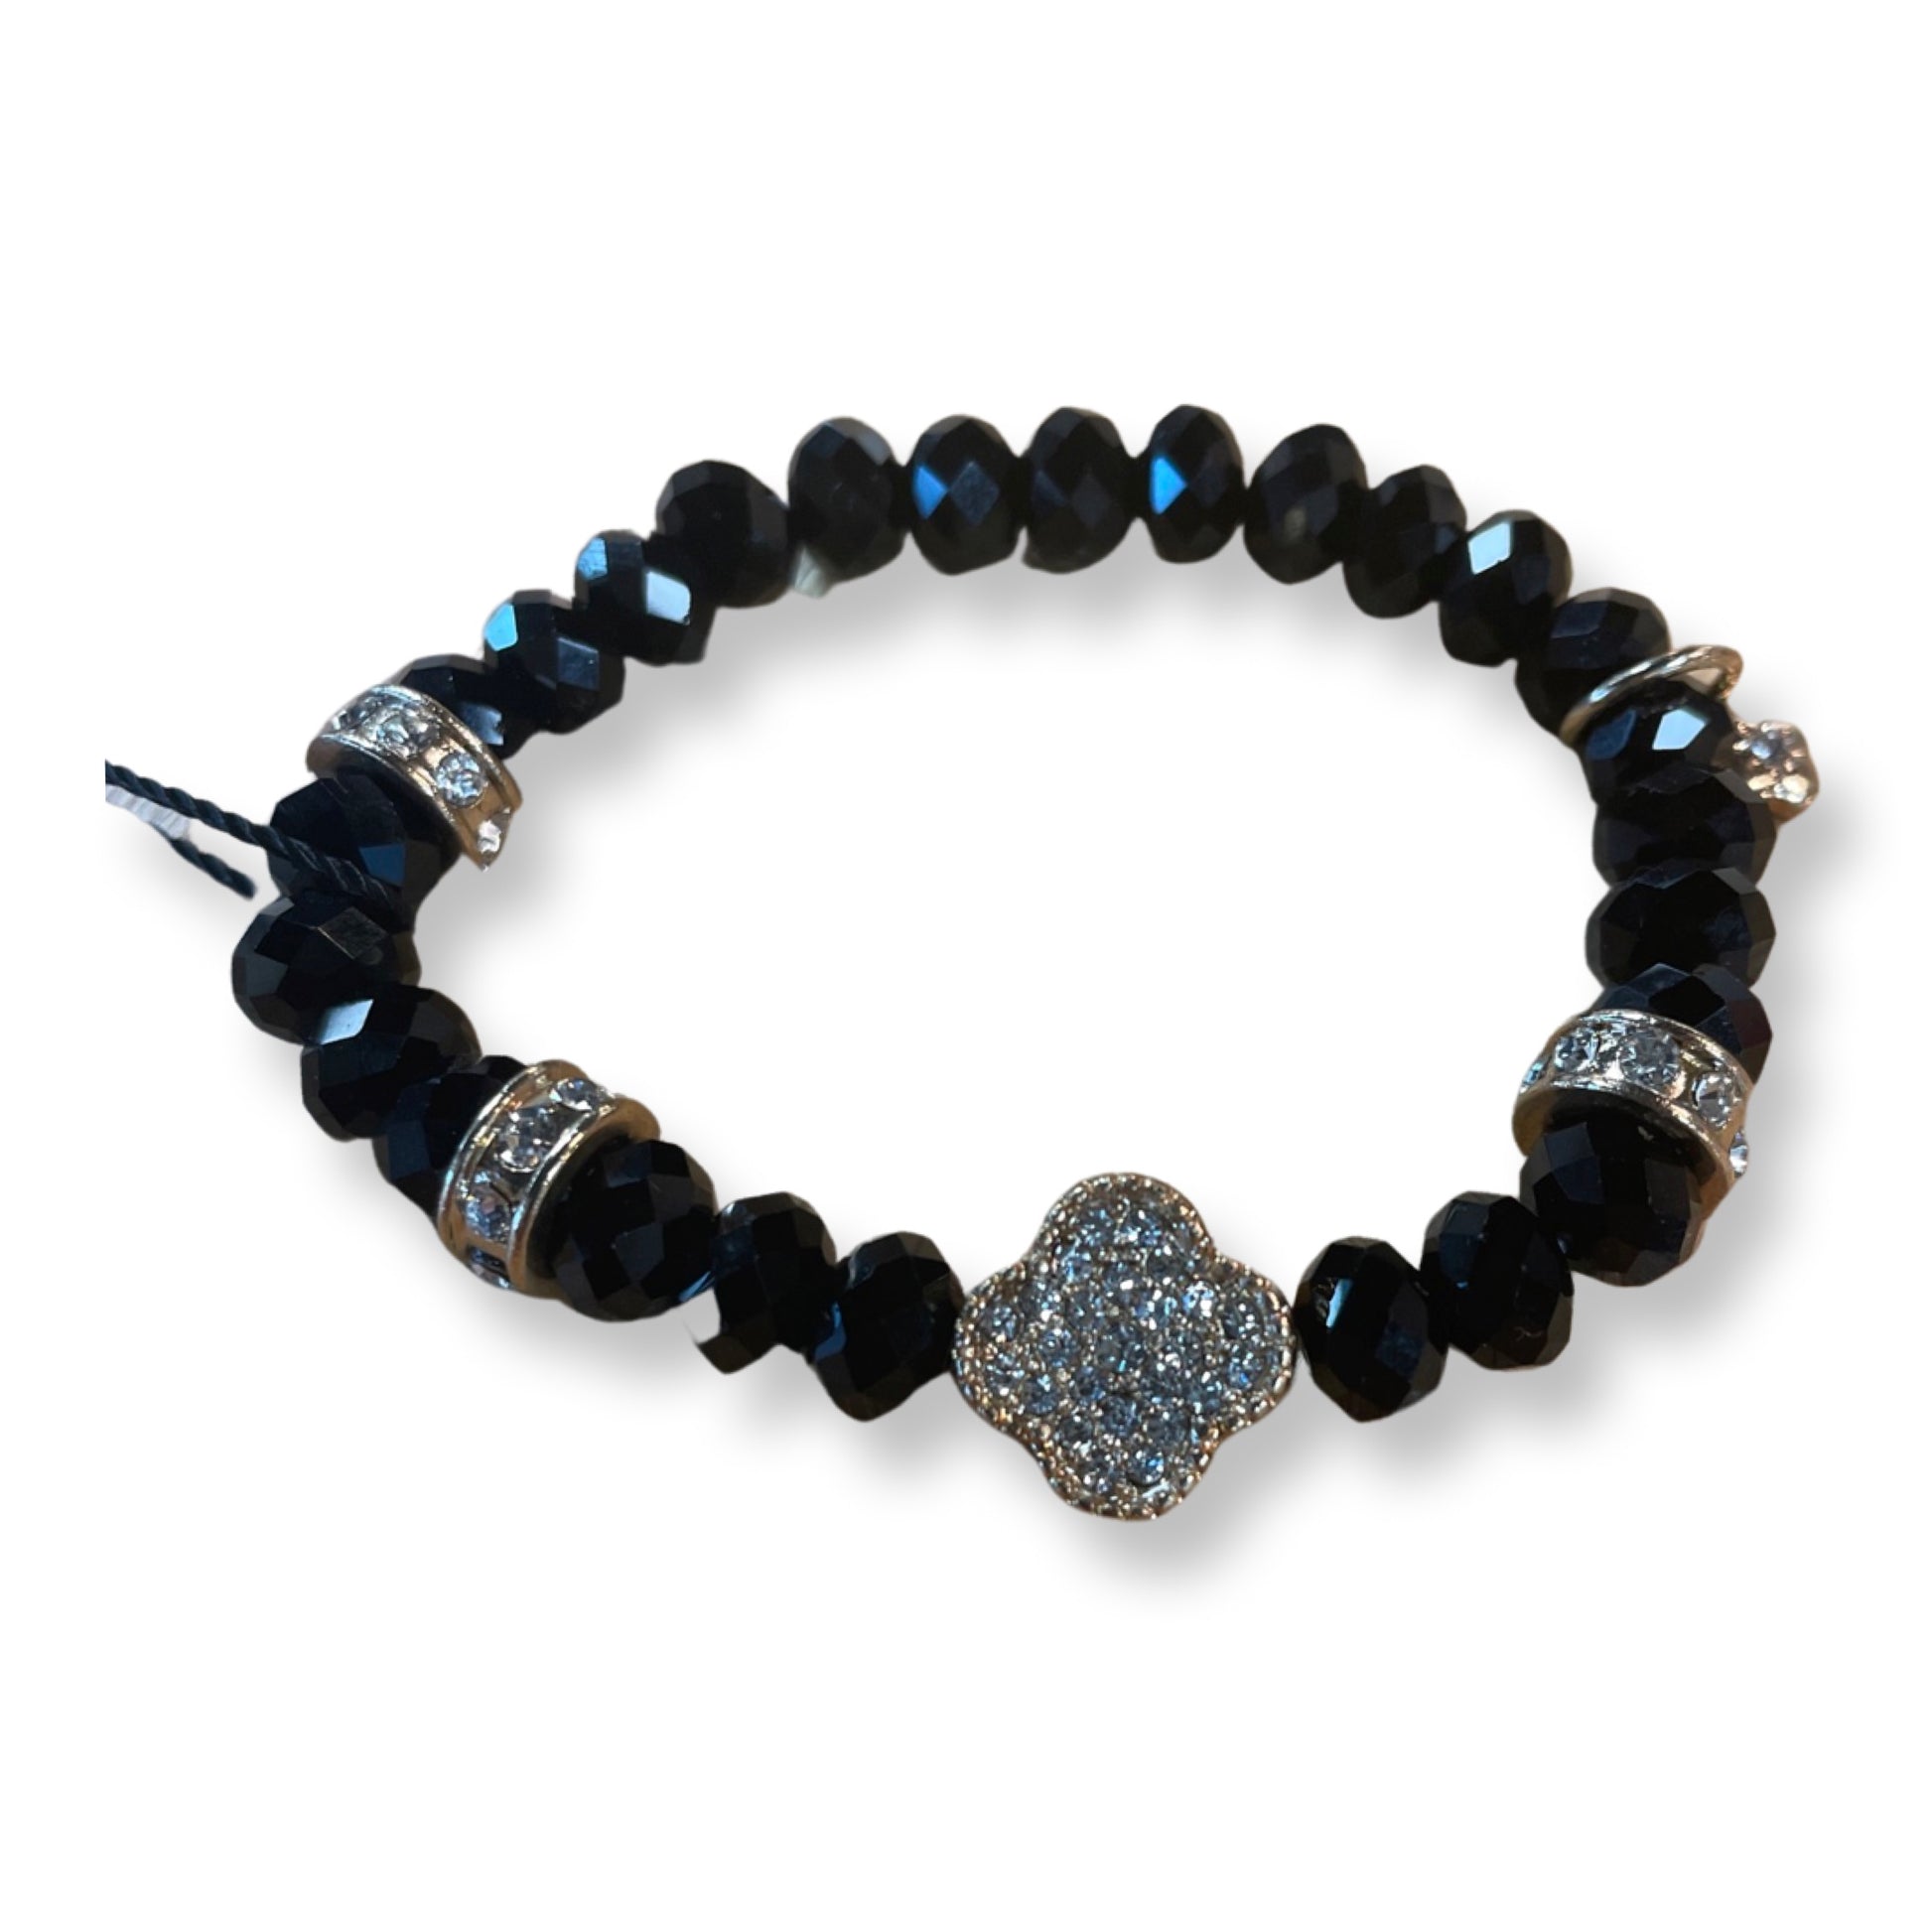 Black beaded bracelet with gold and diamond accents